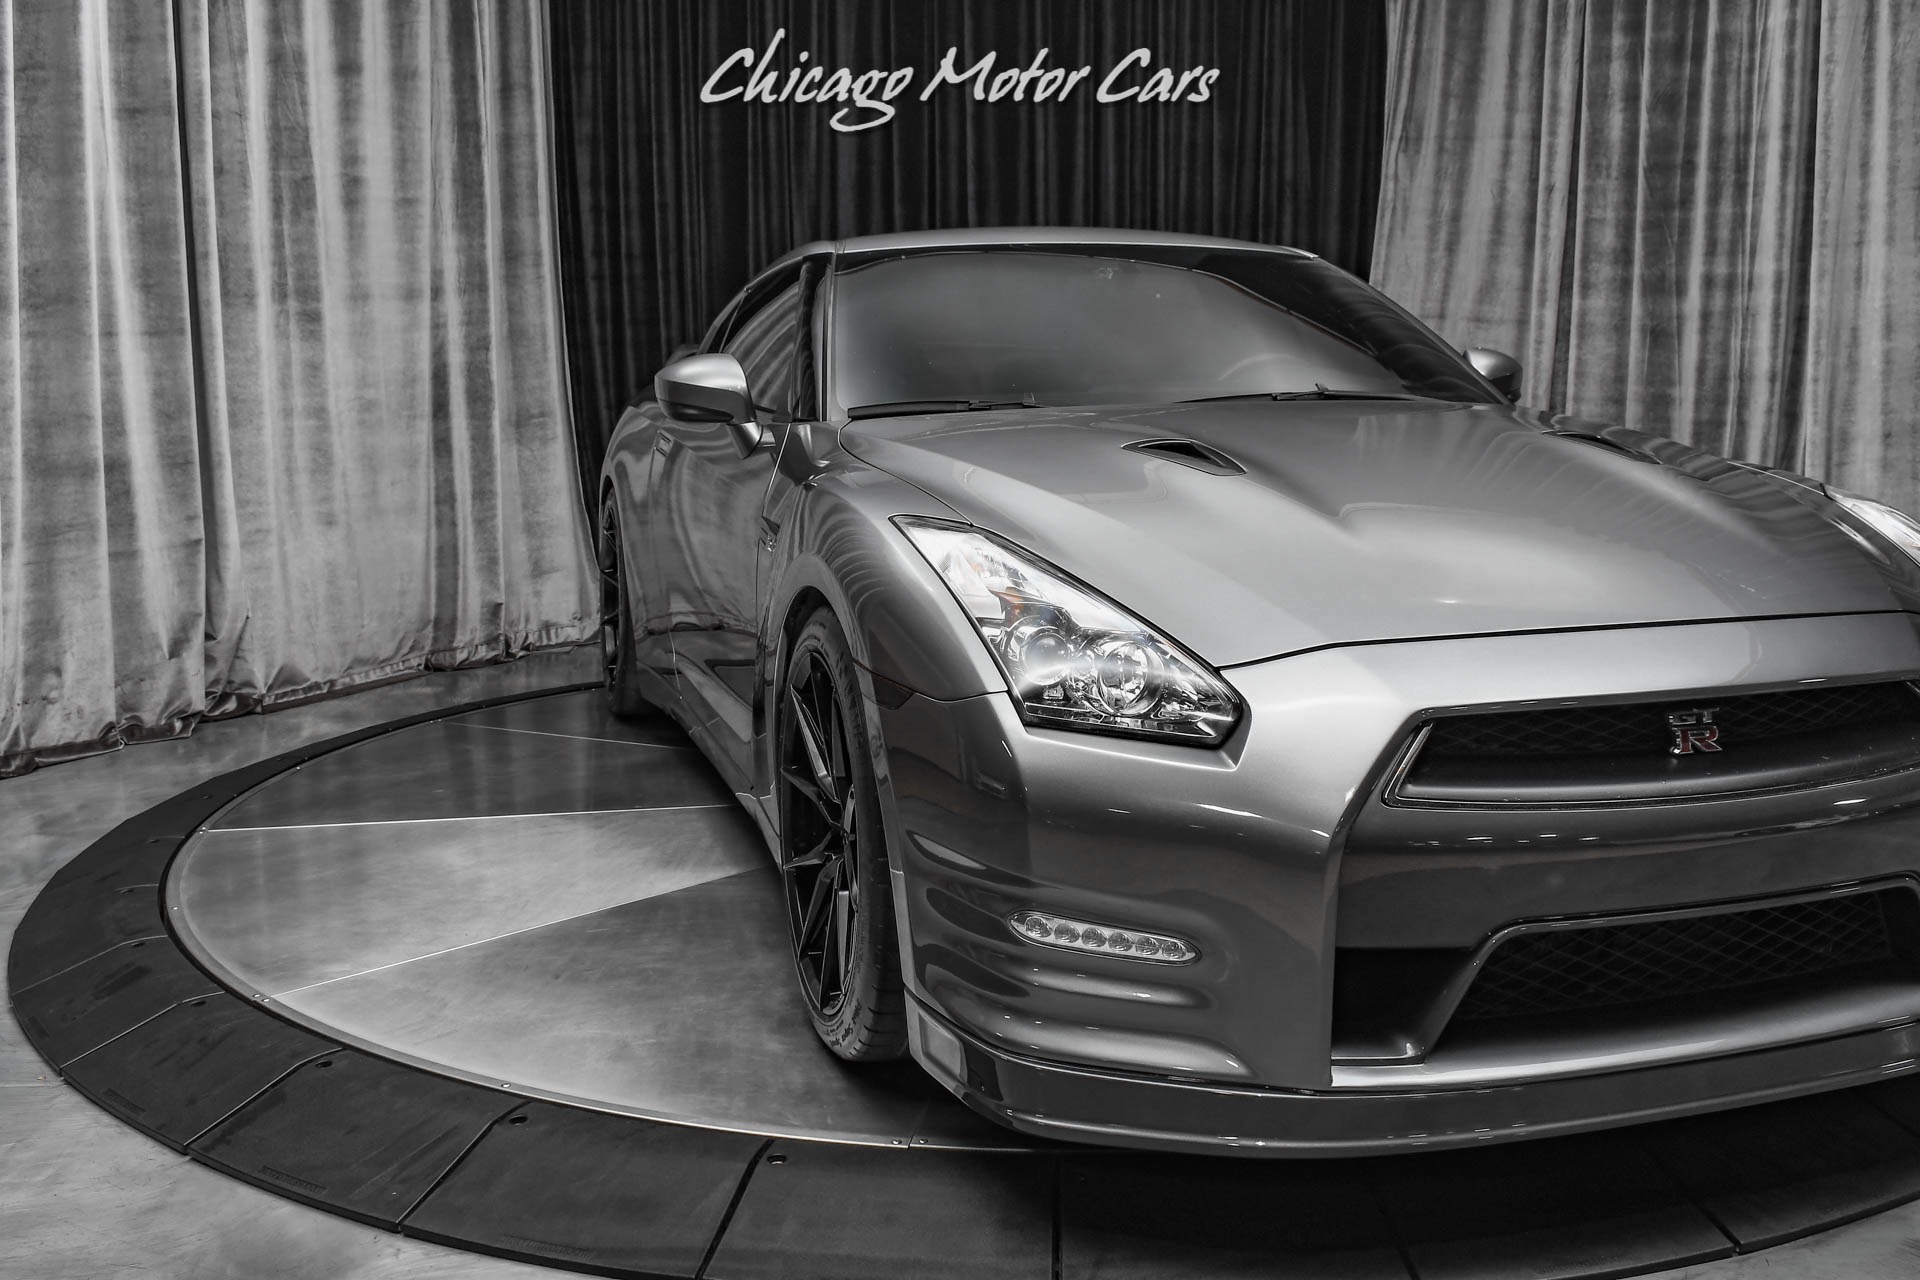 Used-2014-Nissan-GT-R-Black-Edition-Coupe-FBO-700HP-SHEP-TRANS-Armytrix-Exhaust-Stunning